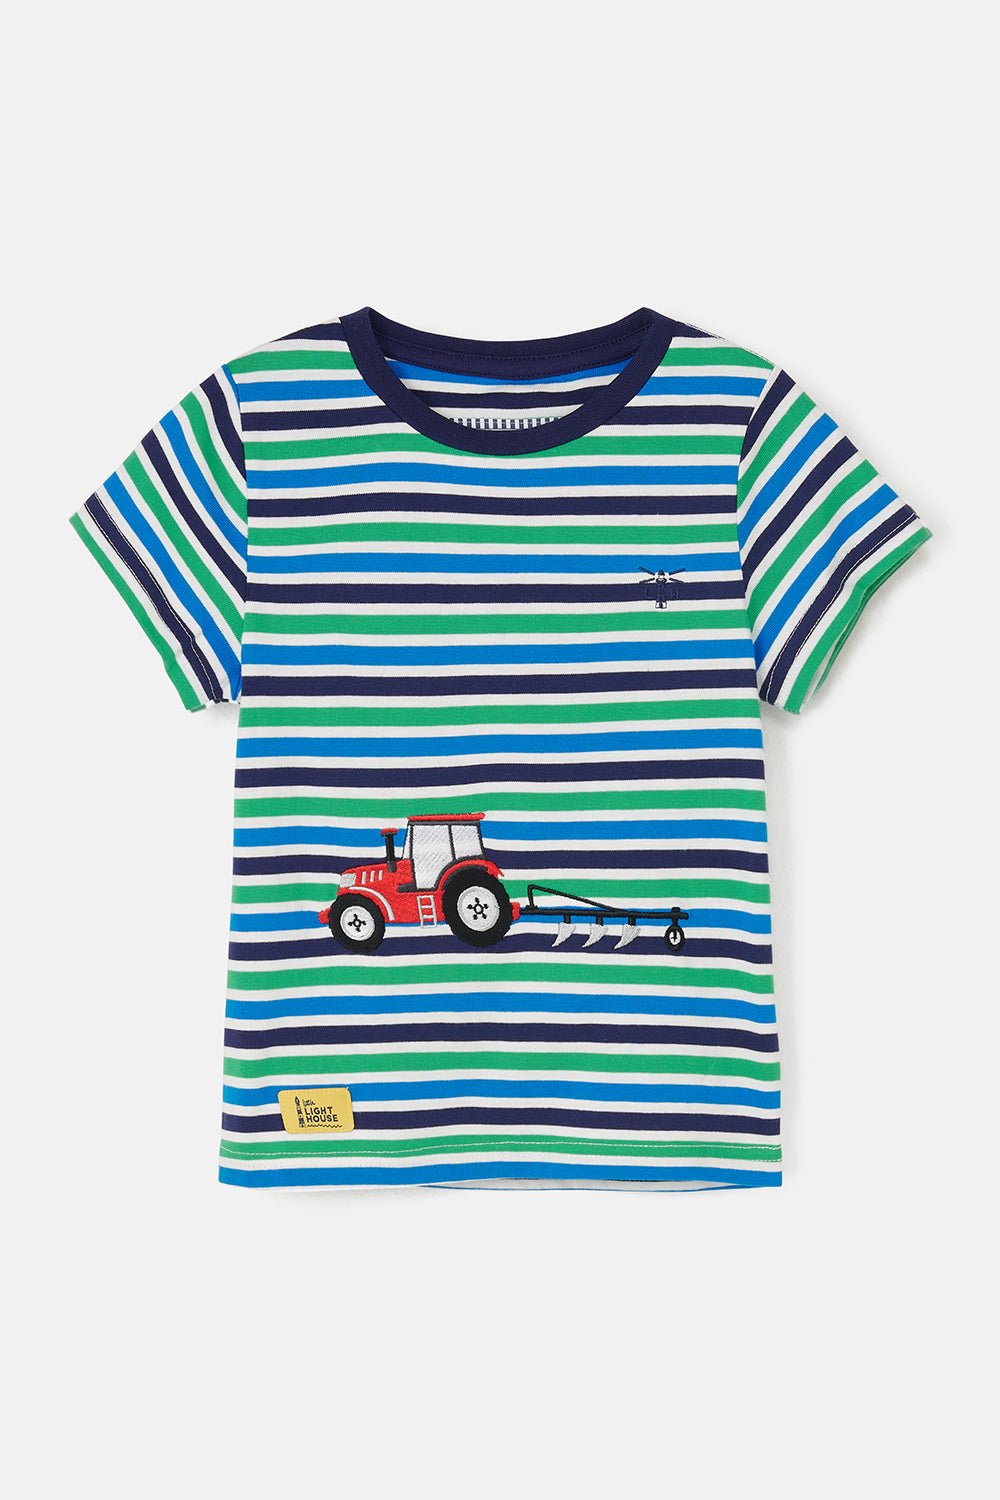 Oliver boys' tee, Peagreen Stripe Tractor